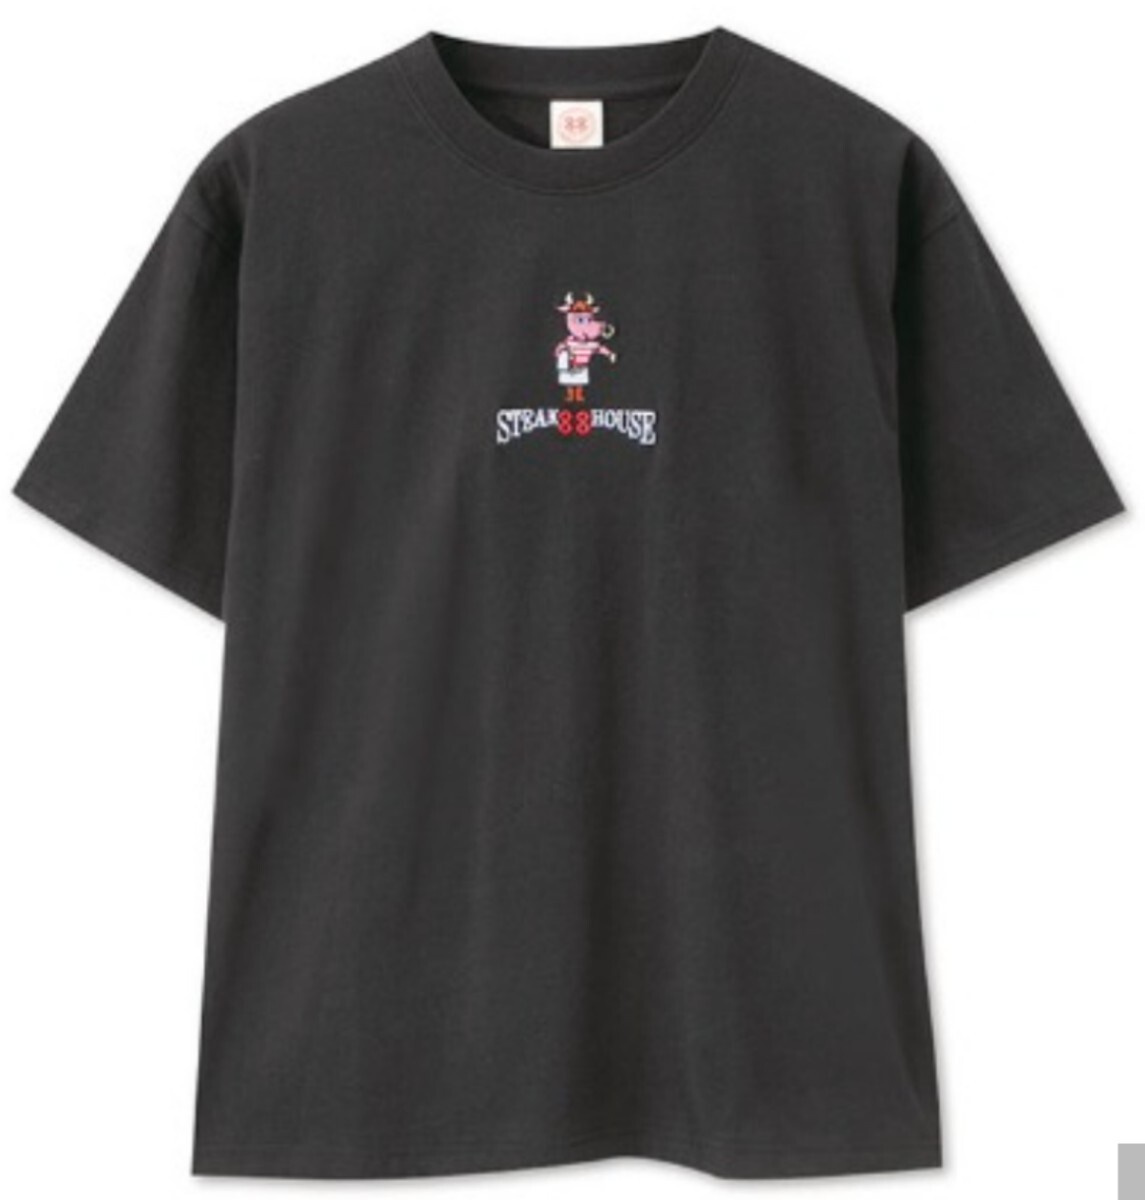  prompt decision steak house 88 men's T-shirt [M] tag equipped 